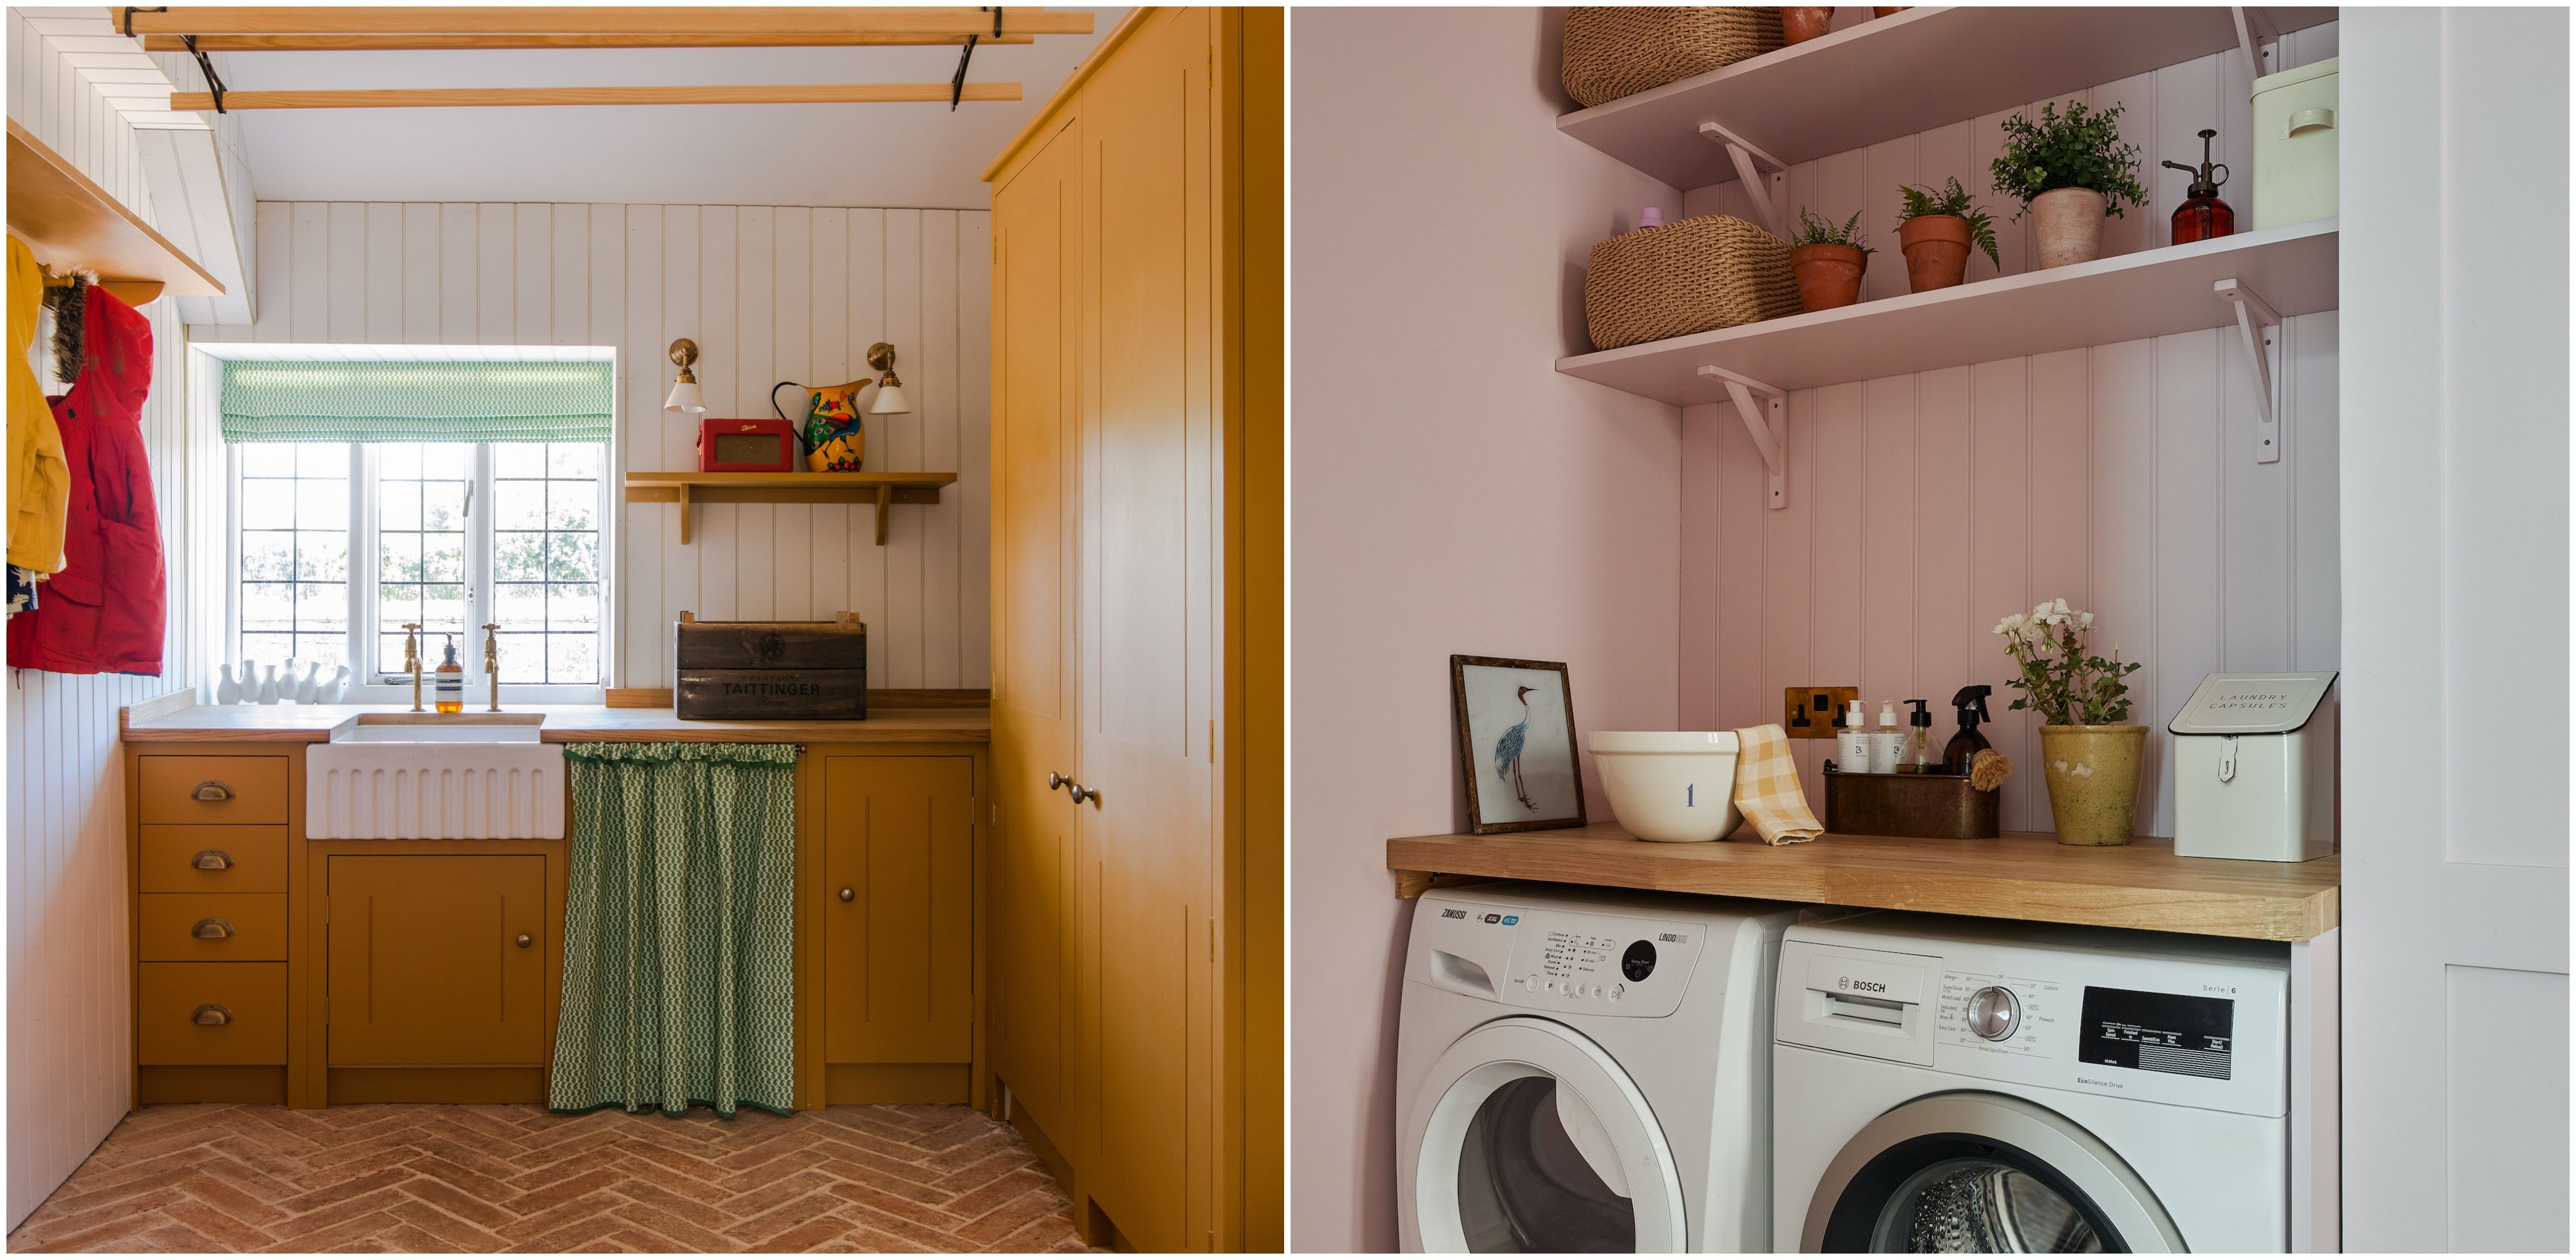 utility room ideas: 23 ways to design this multifunctional space